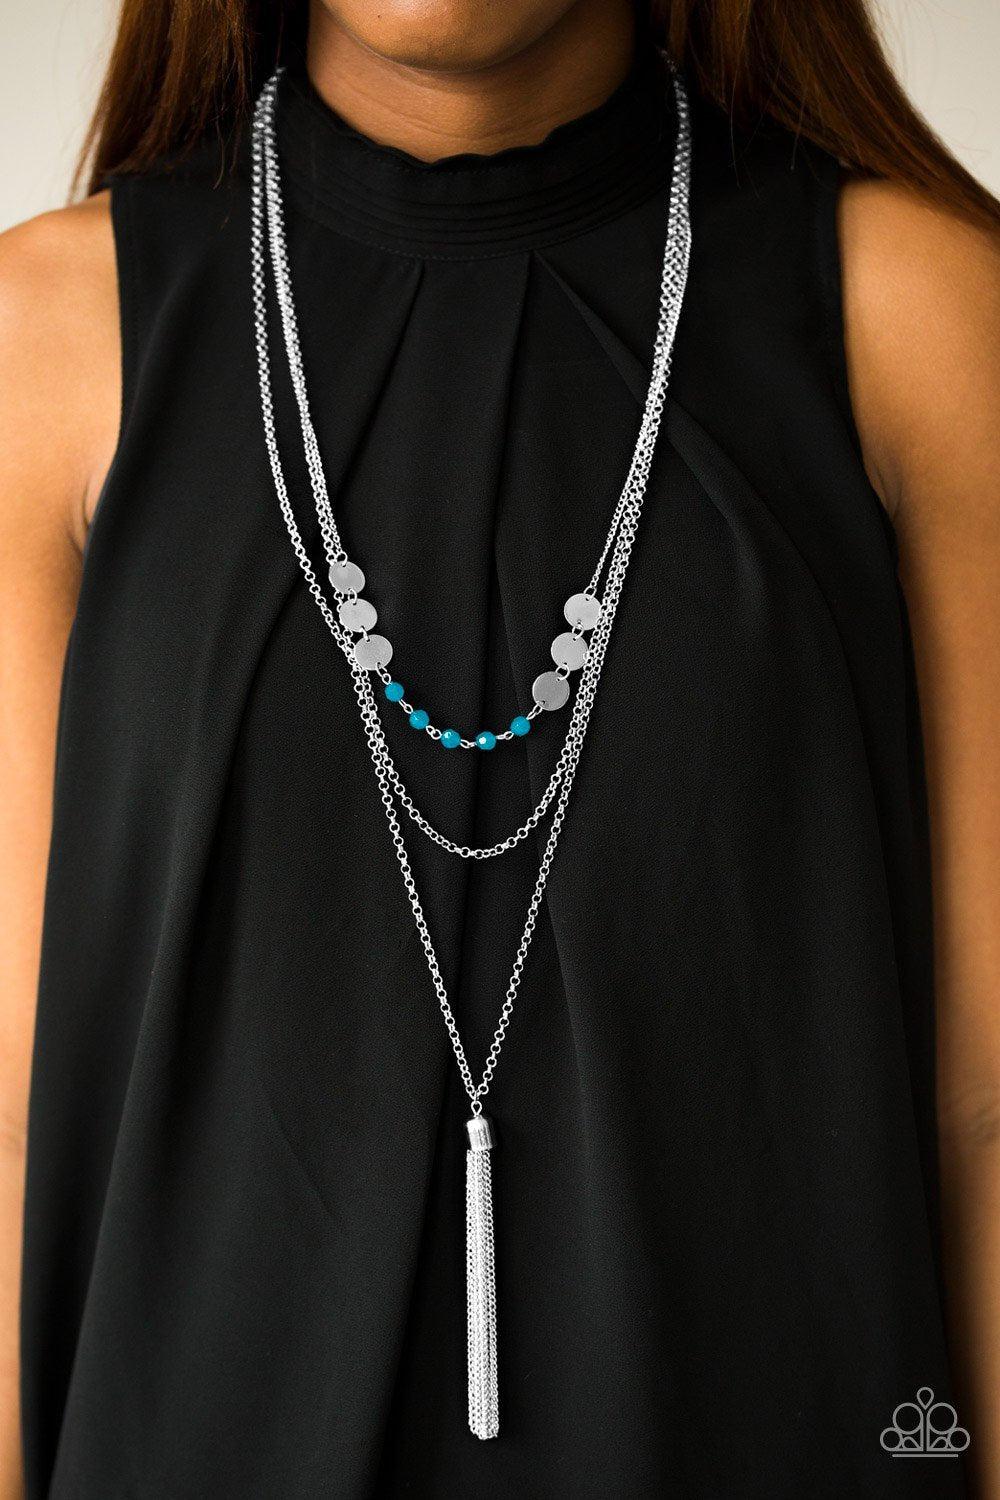 Celebration of Chic Blue and Silver Tassel Necklace - Paparazzi Accessories-CarasShop.com - $5 Jewelry by Cara Jewels